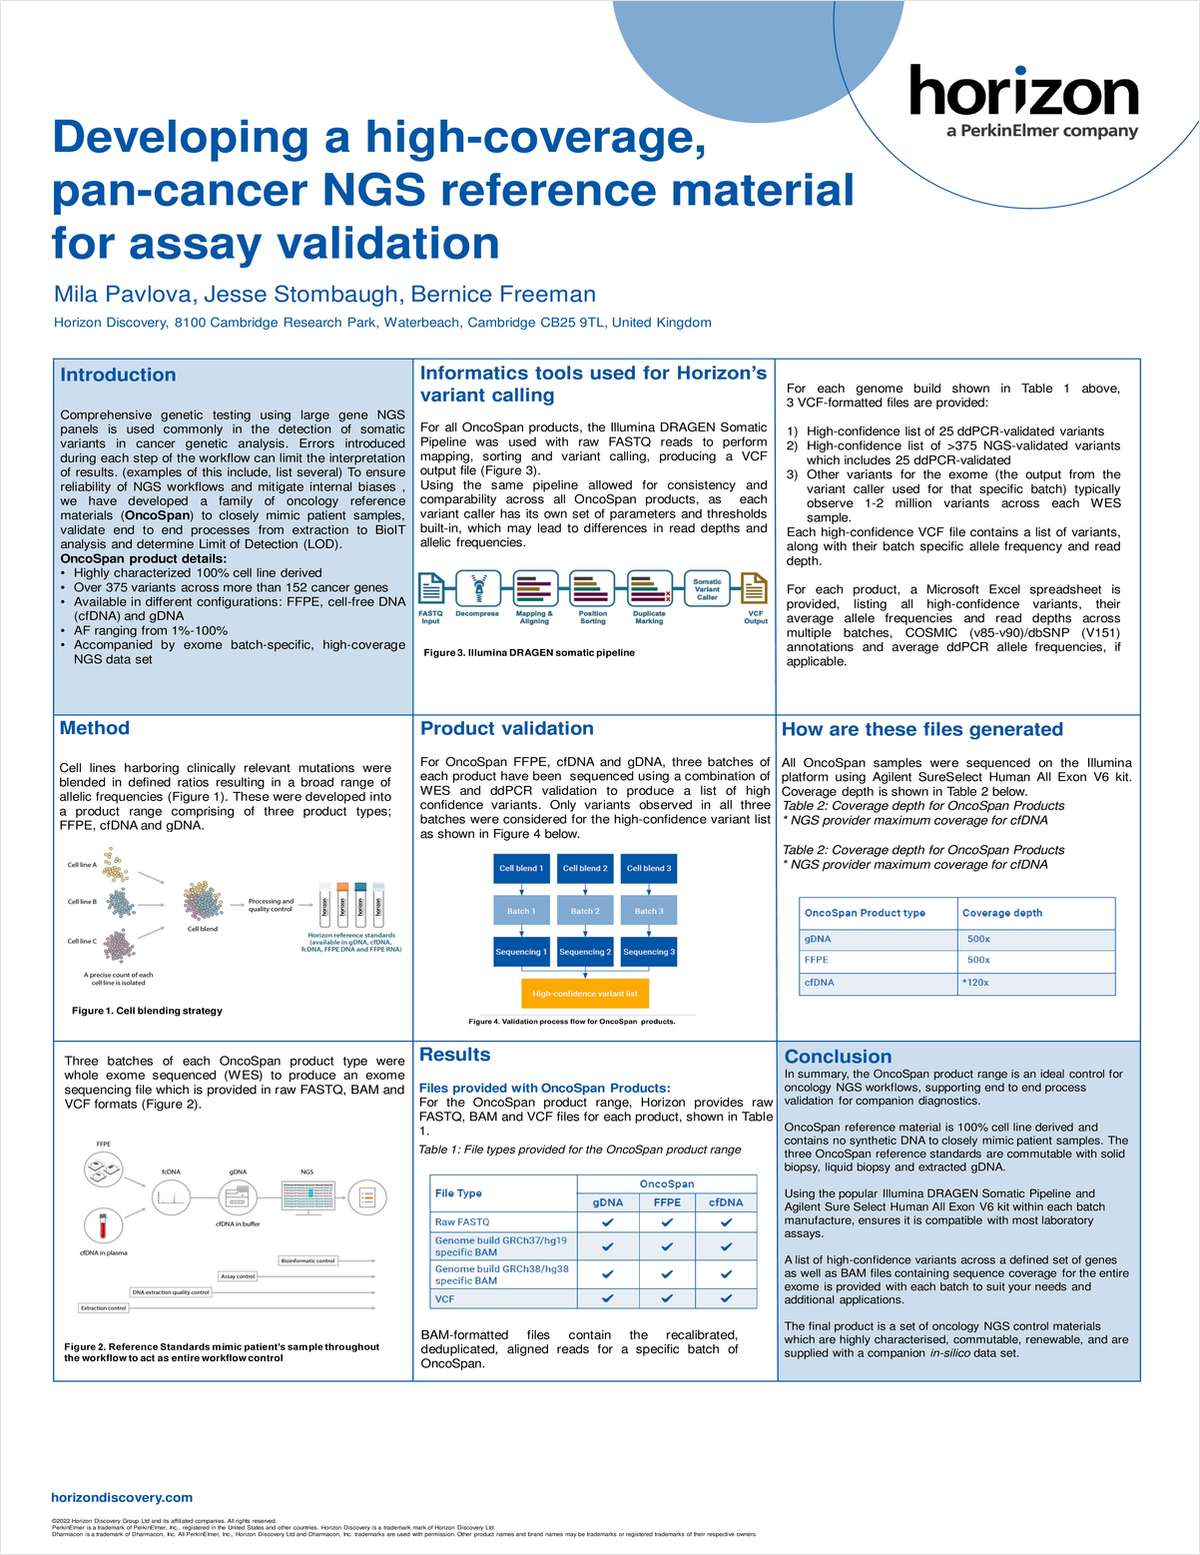 Developing a High-Coverage, Pan-Cancer NGS Reference Material for Assay Validation